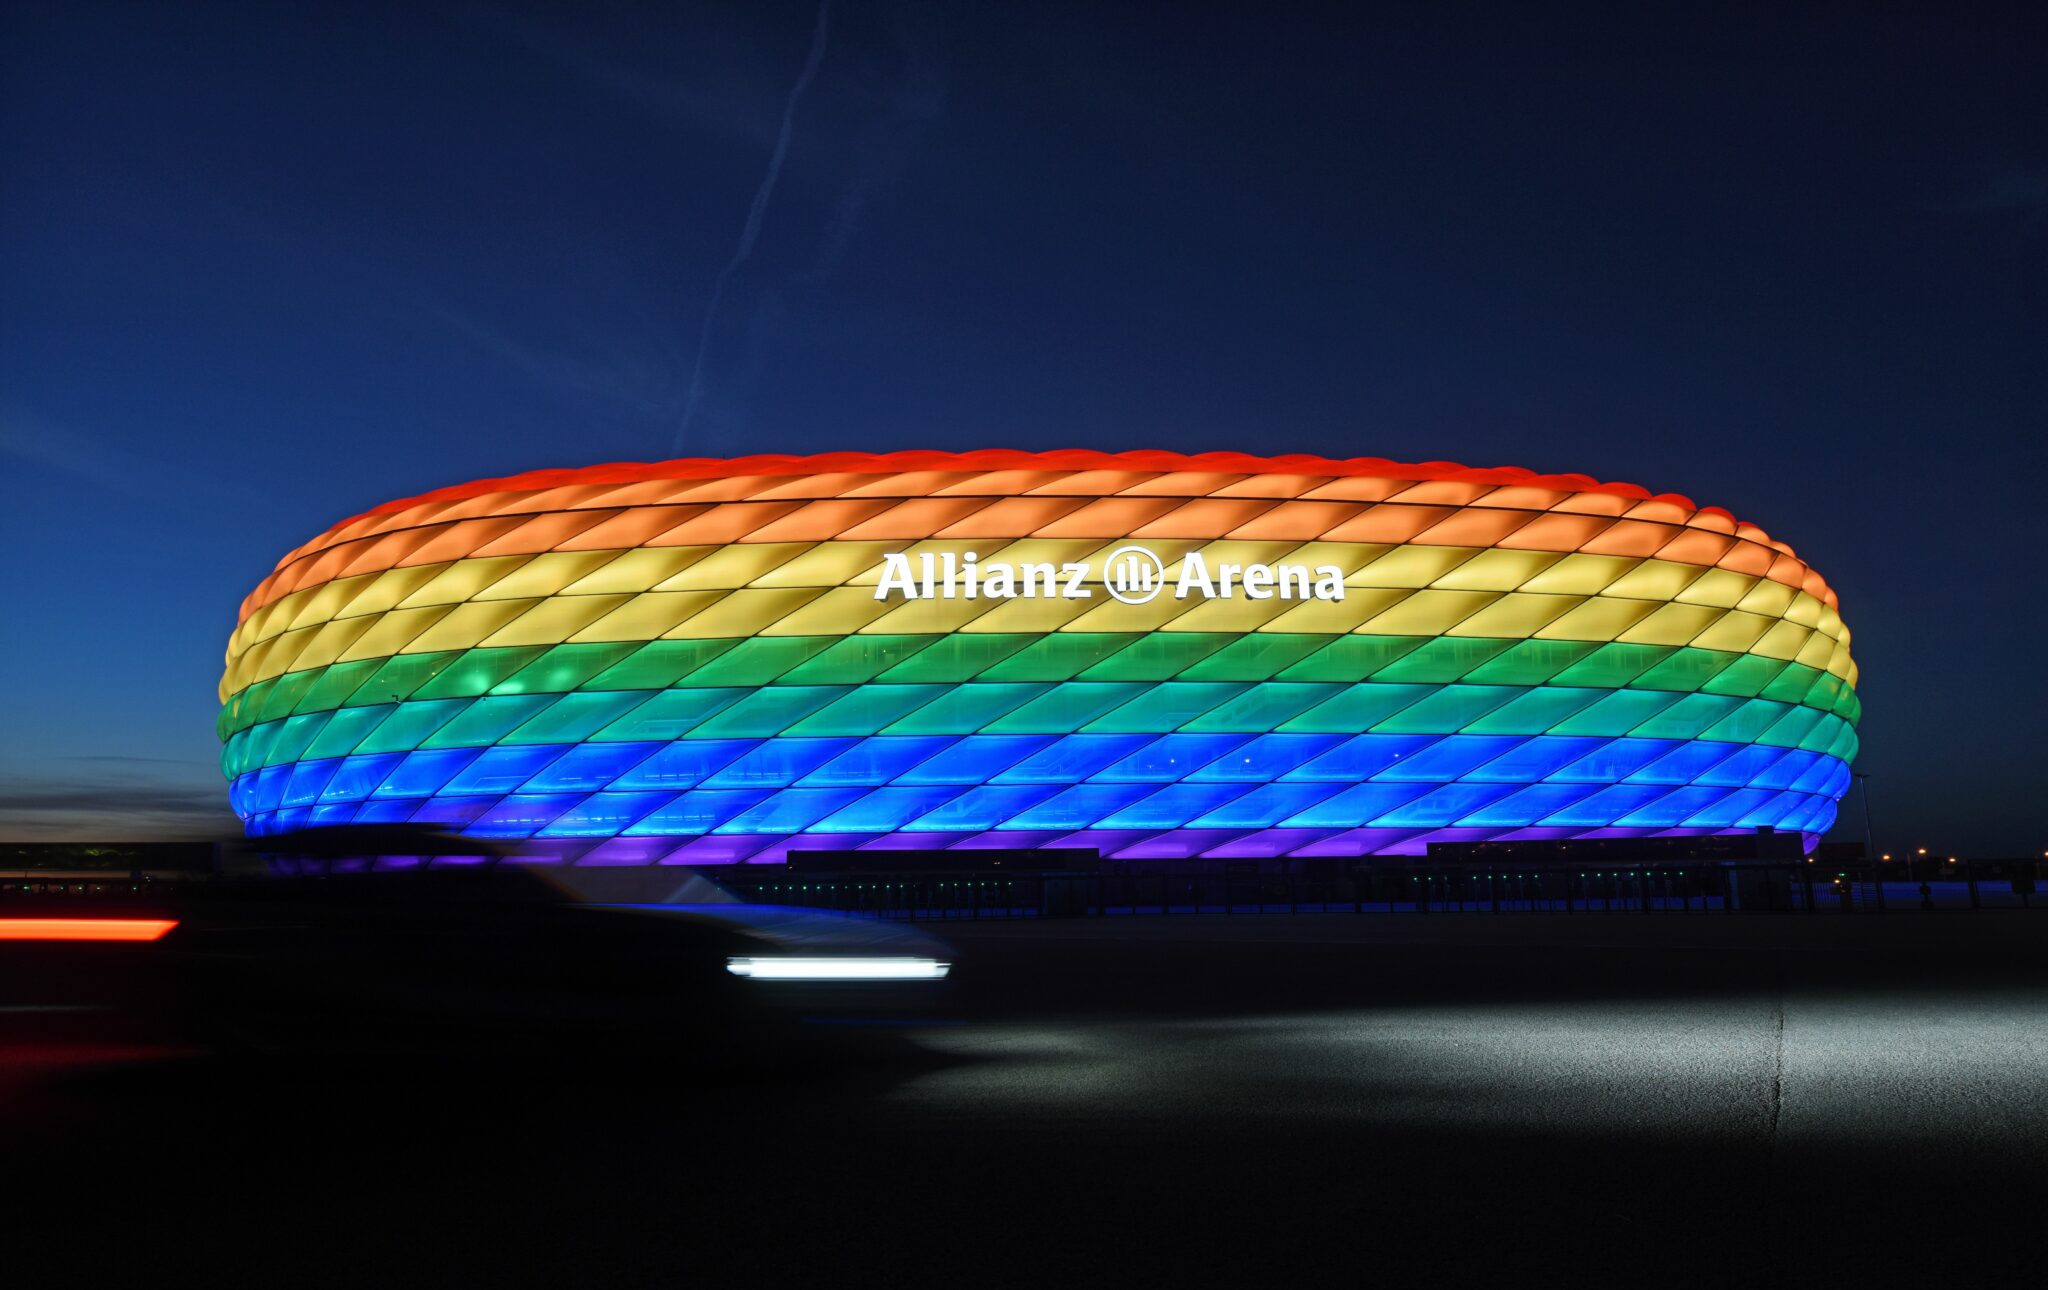 Germany v Hungary: Fans wear rainbow colours at Allianz Arena before Group  F game - BBC Sport